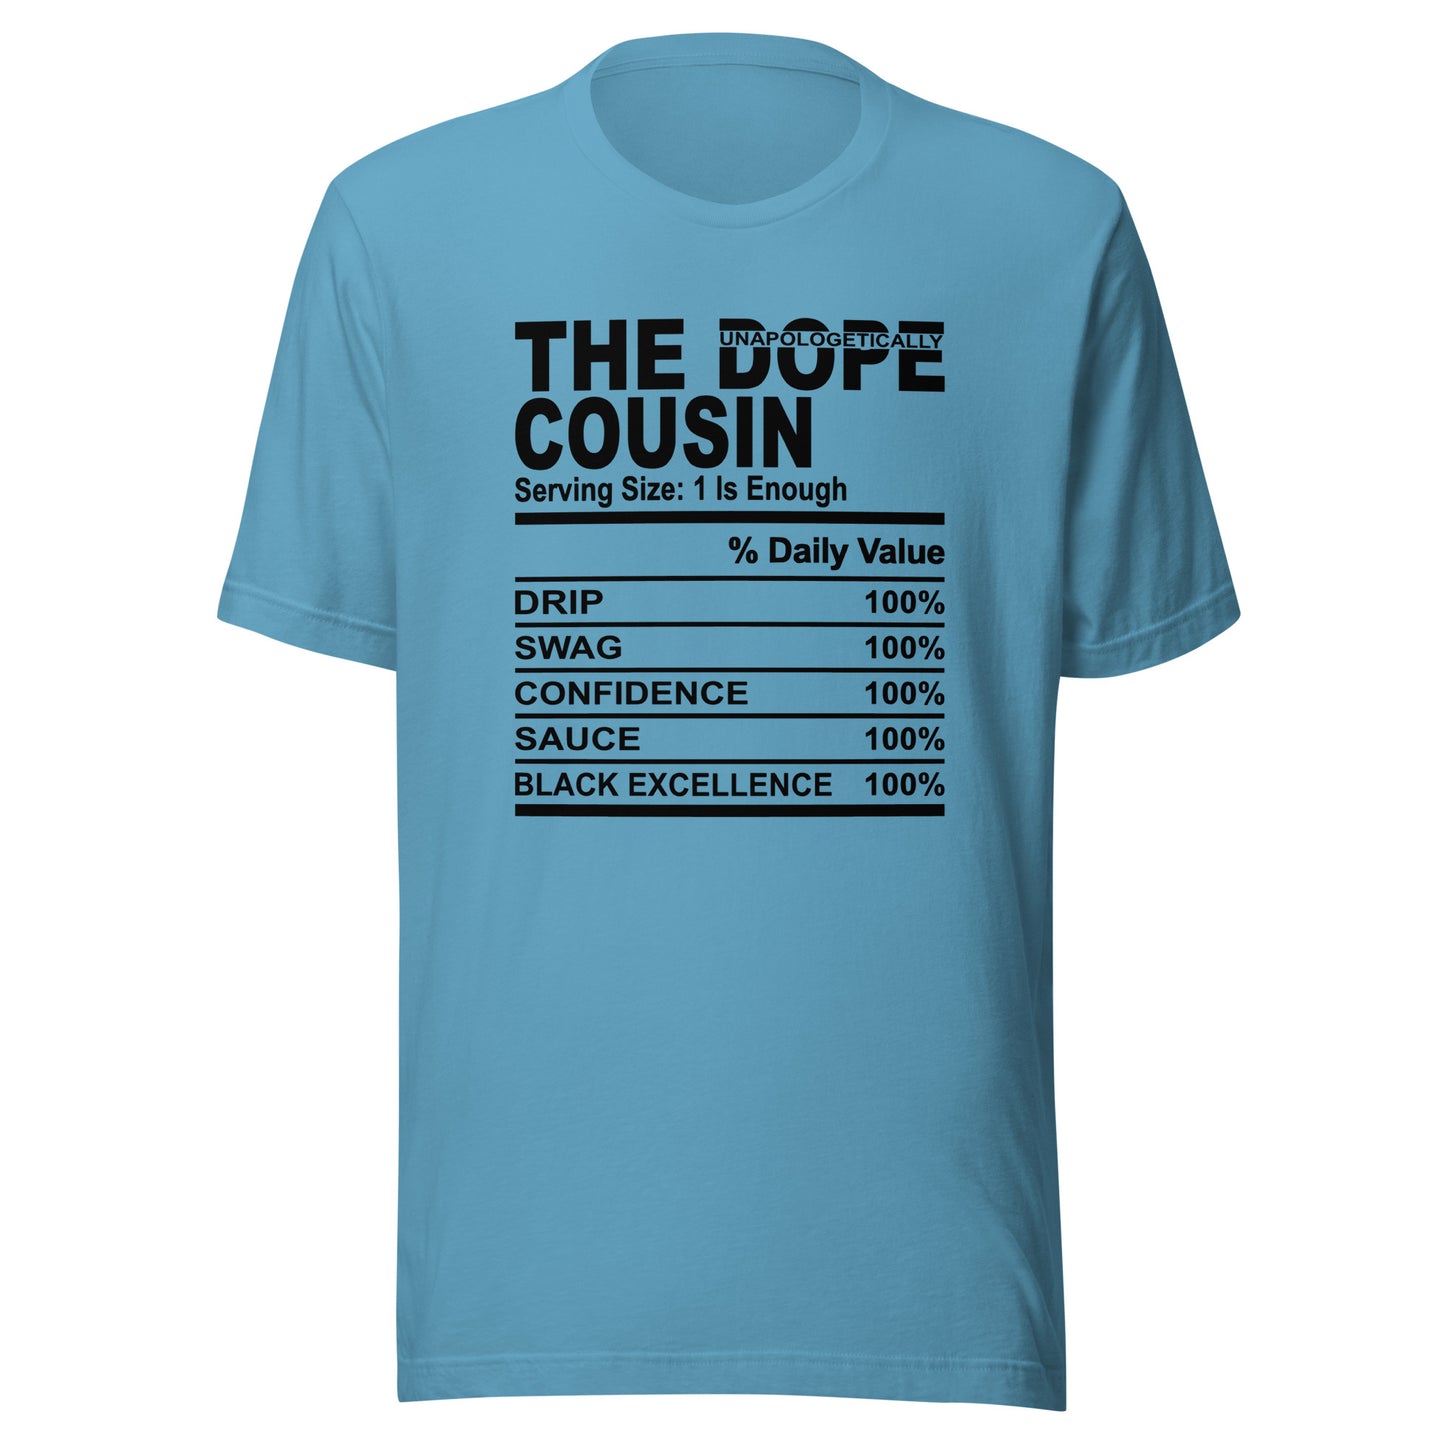 THE DOPE COUSIN (Unapologetically)- S-M - Unisex T-Shirt (black print)